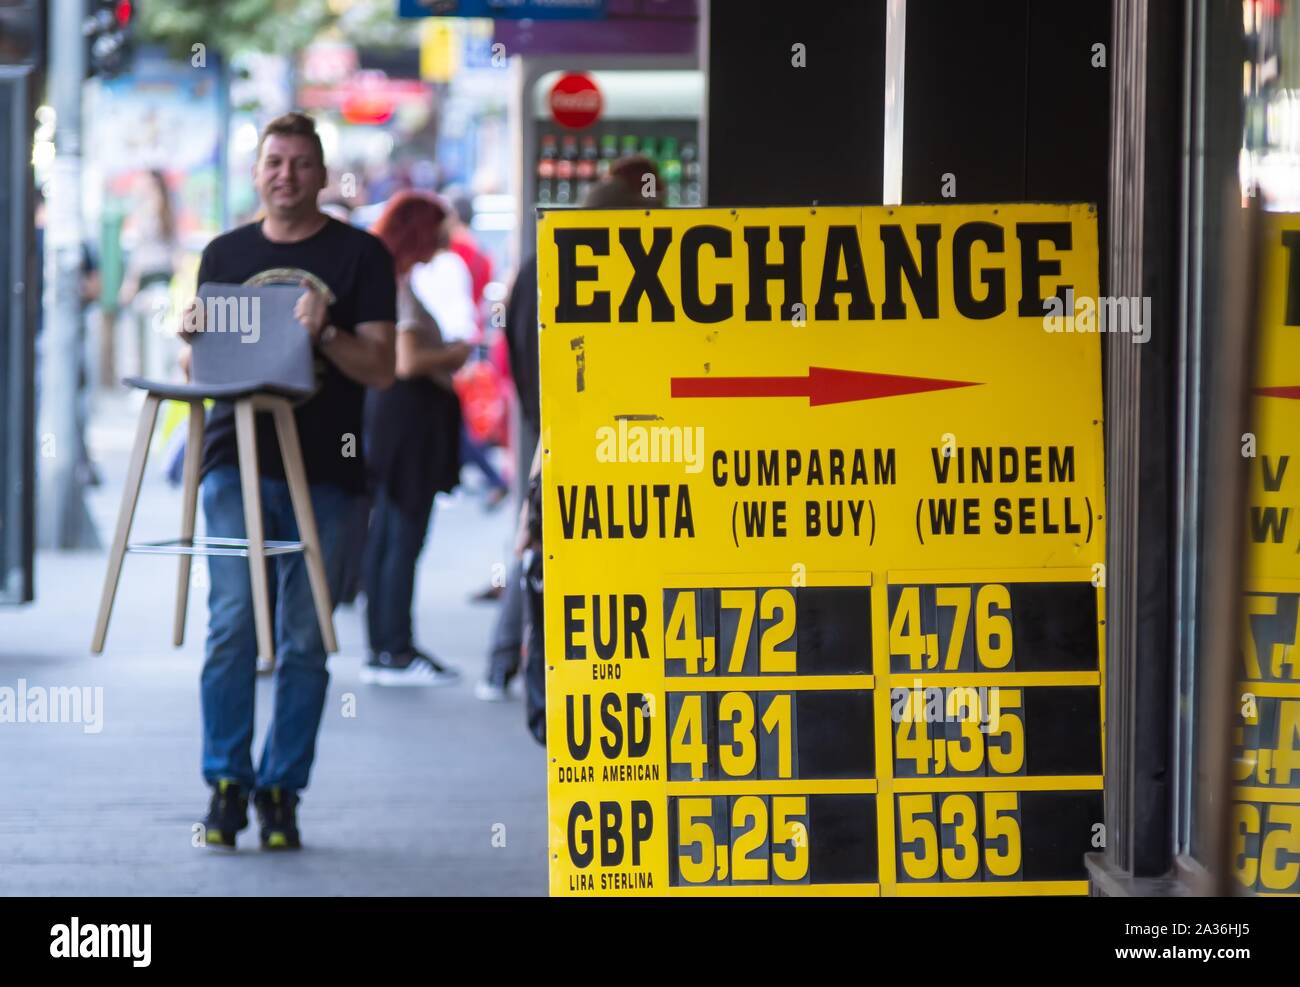 Bucharest, Romania - September 30, 2019: The exchange rate of the main currencies is displayed on a yellow board at the entrance of a currency exchang Stock Photo